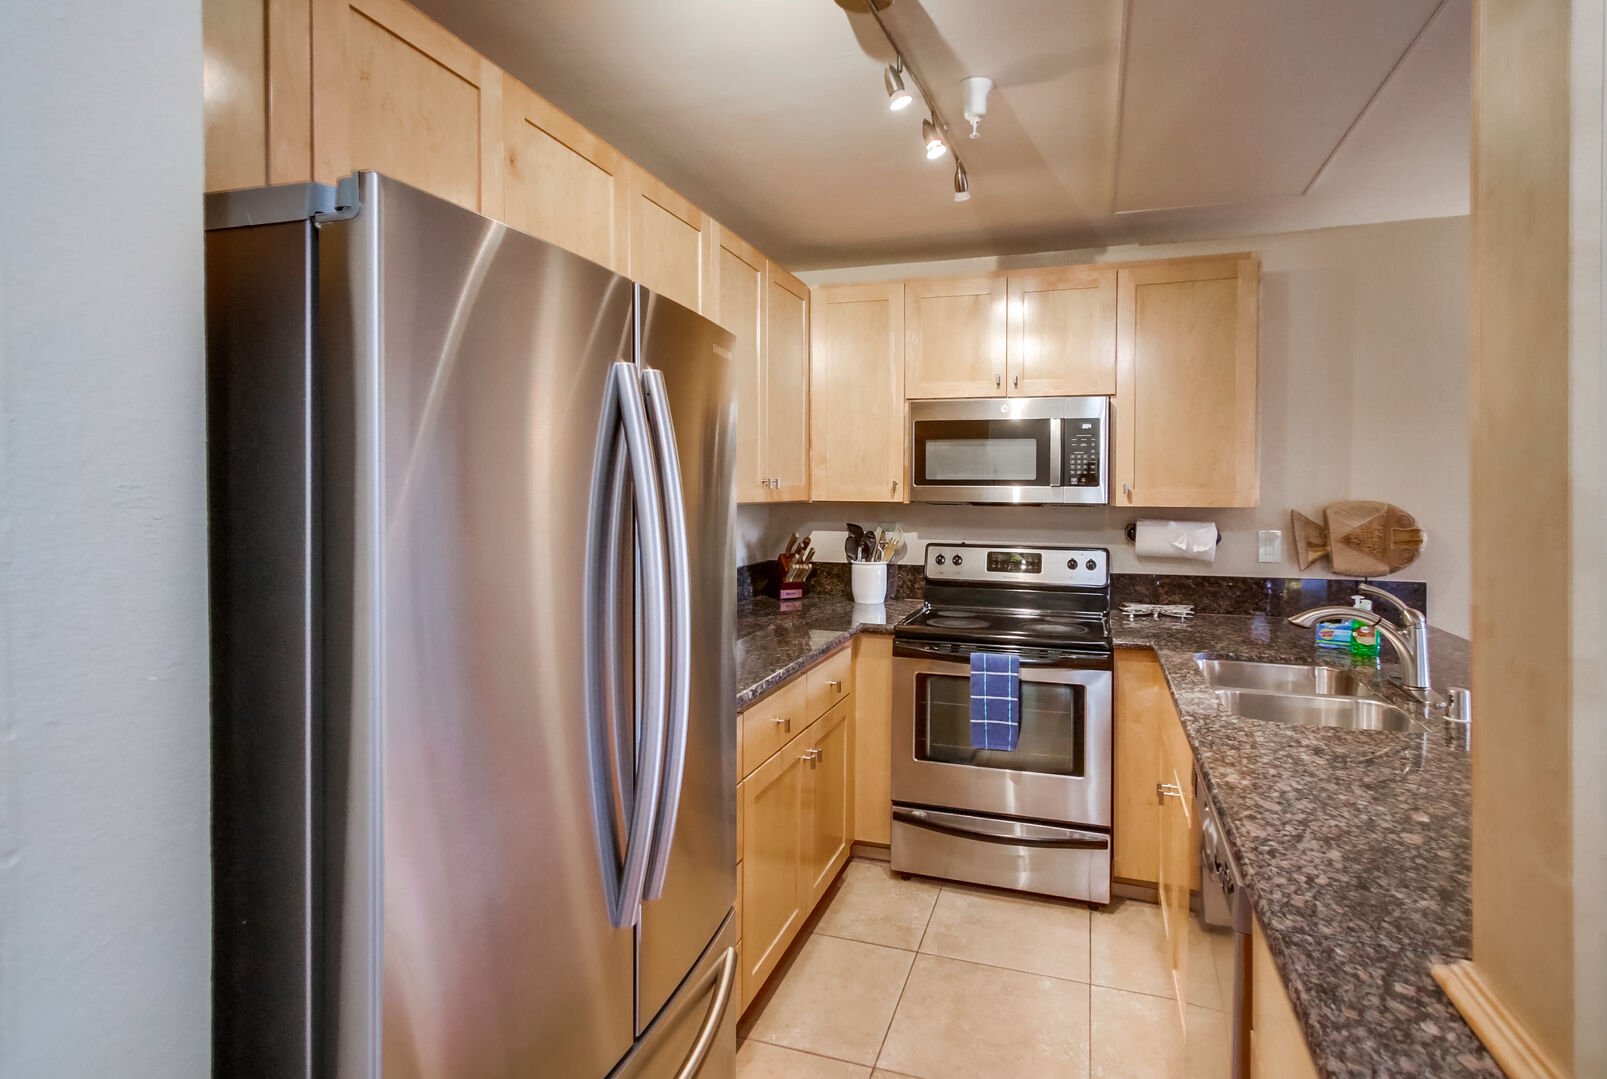 Brand new stainless steel appliances in the kitchen!